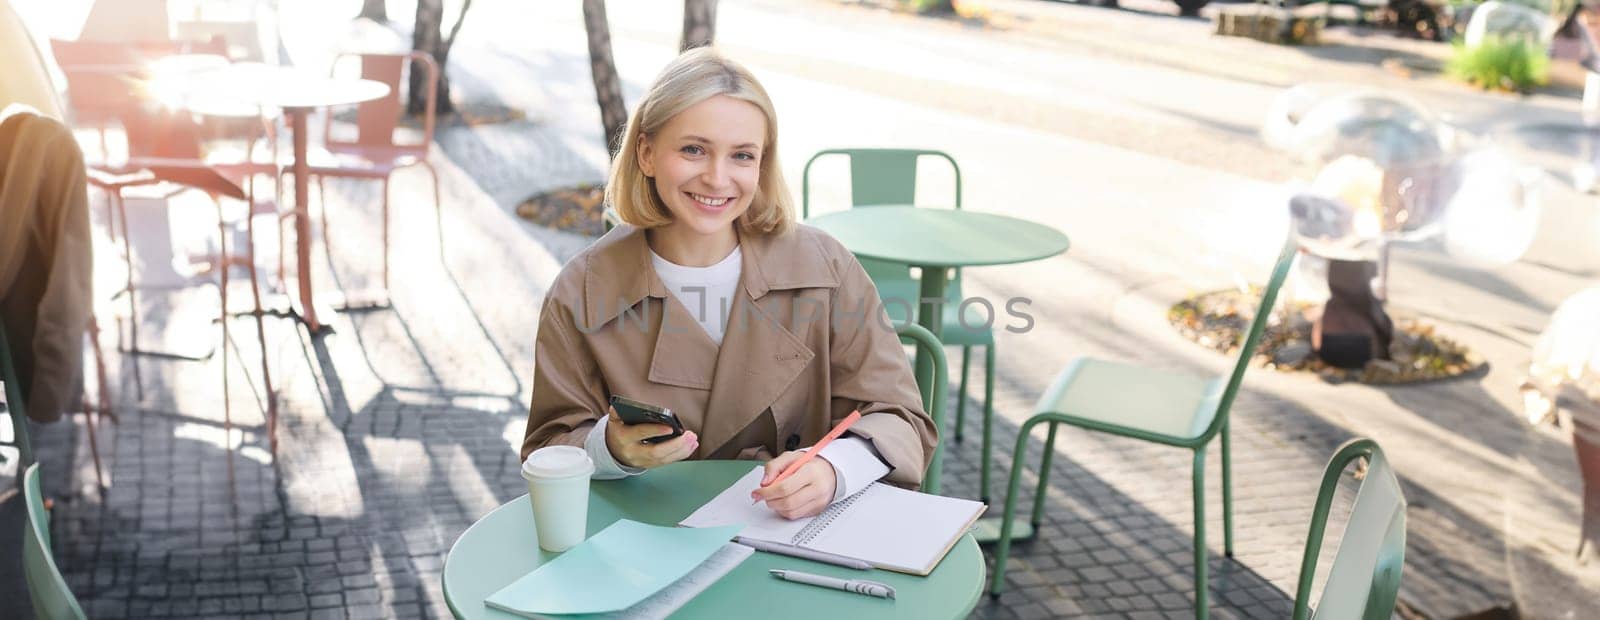 Portrait of smiling young woman using mobile phone while doing homework, working on project, sitting outdoors in cafe, drinking coffee and studying, holding smartphone by Benzoix